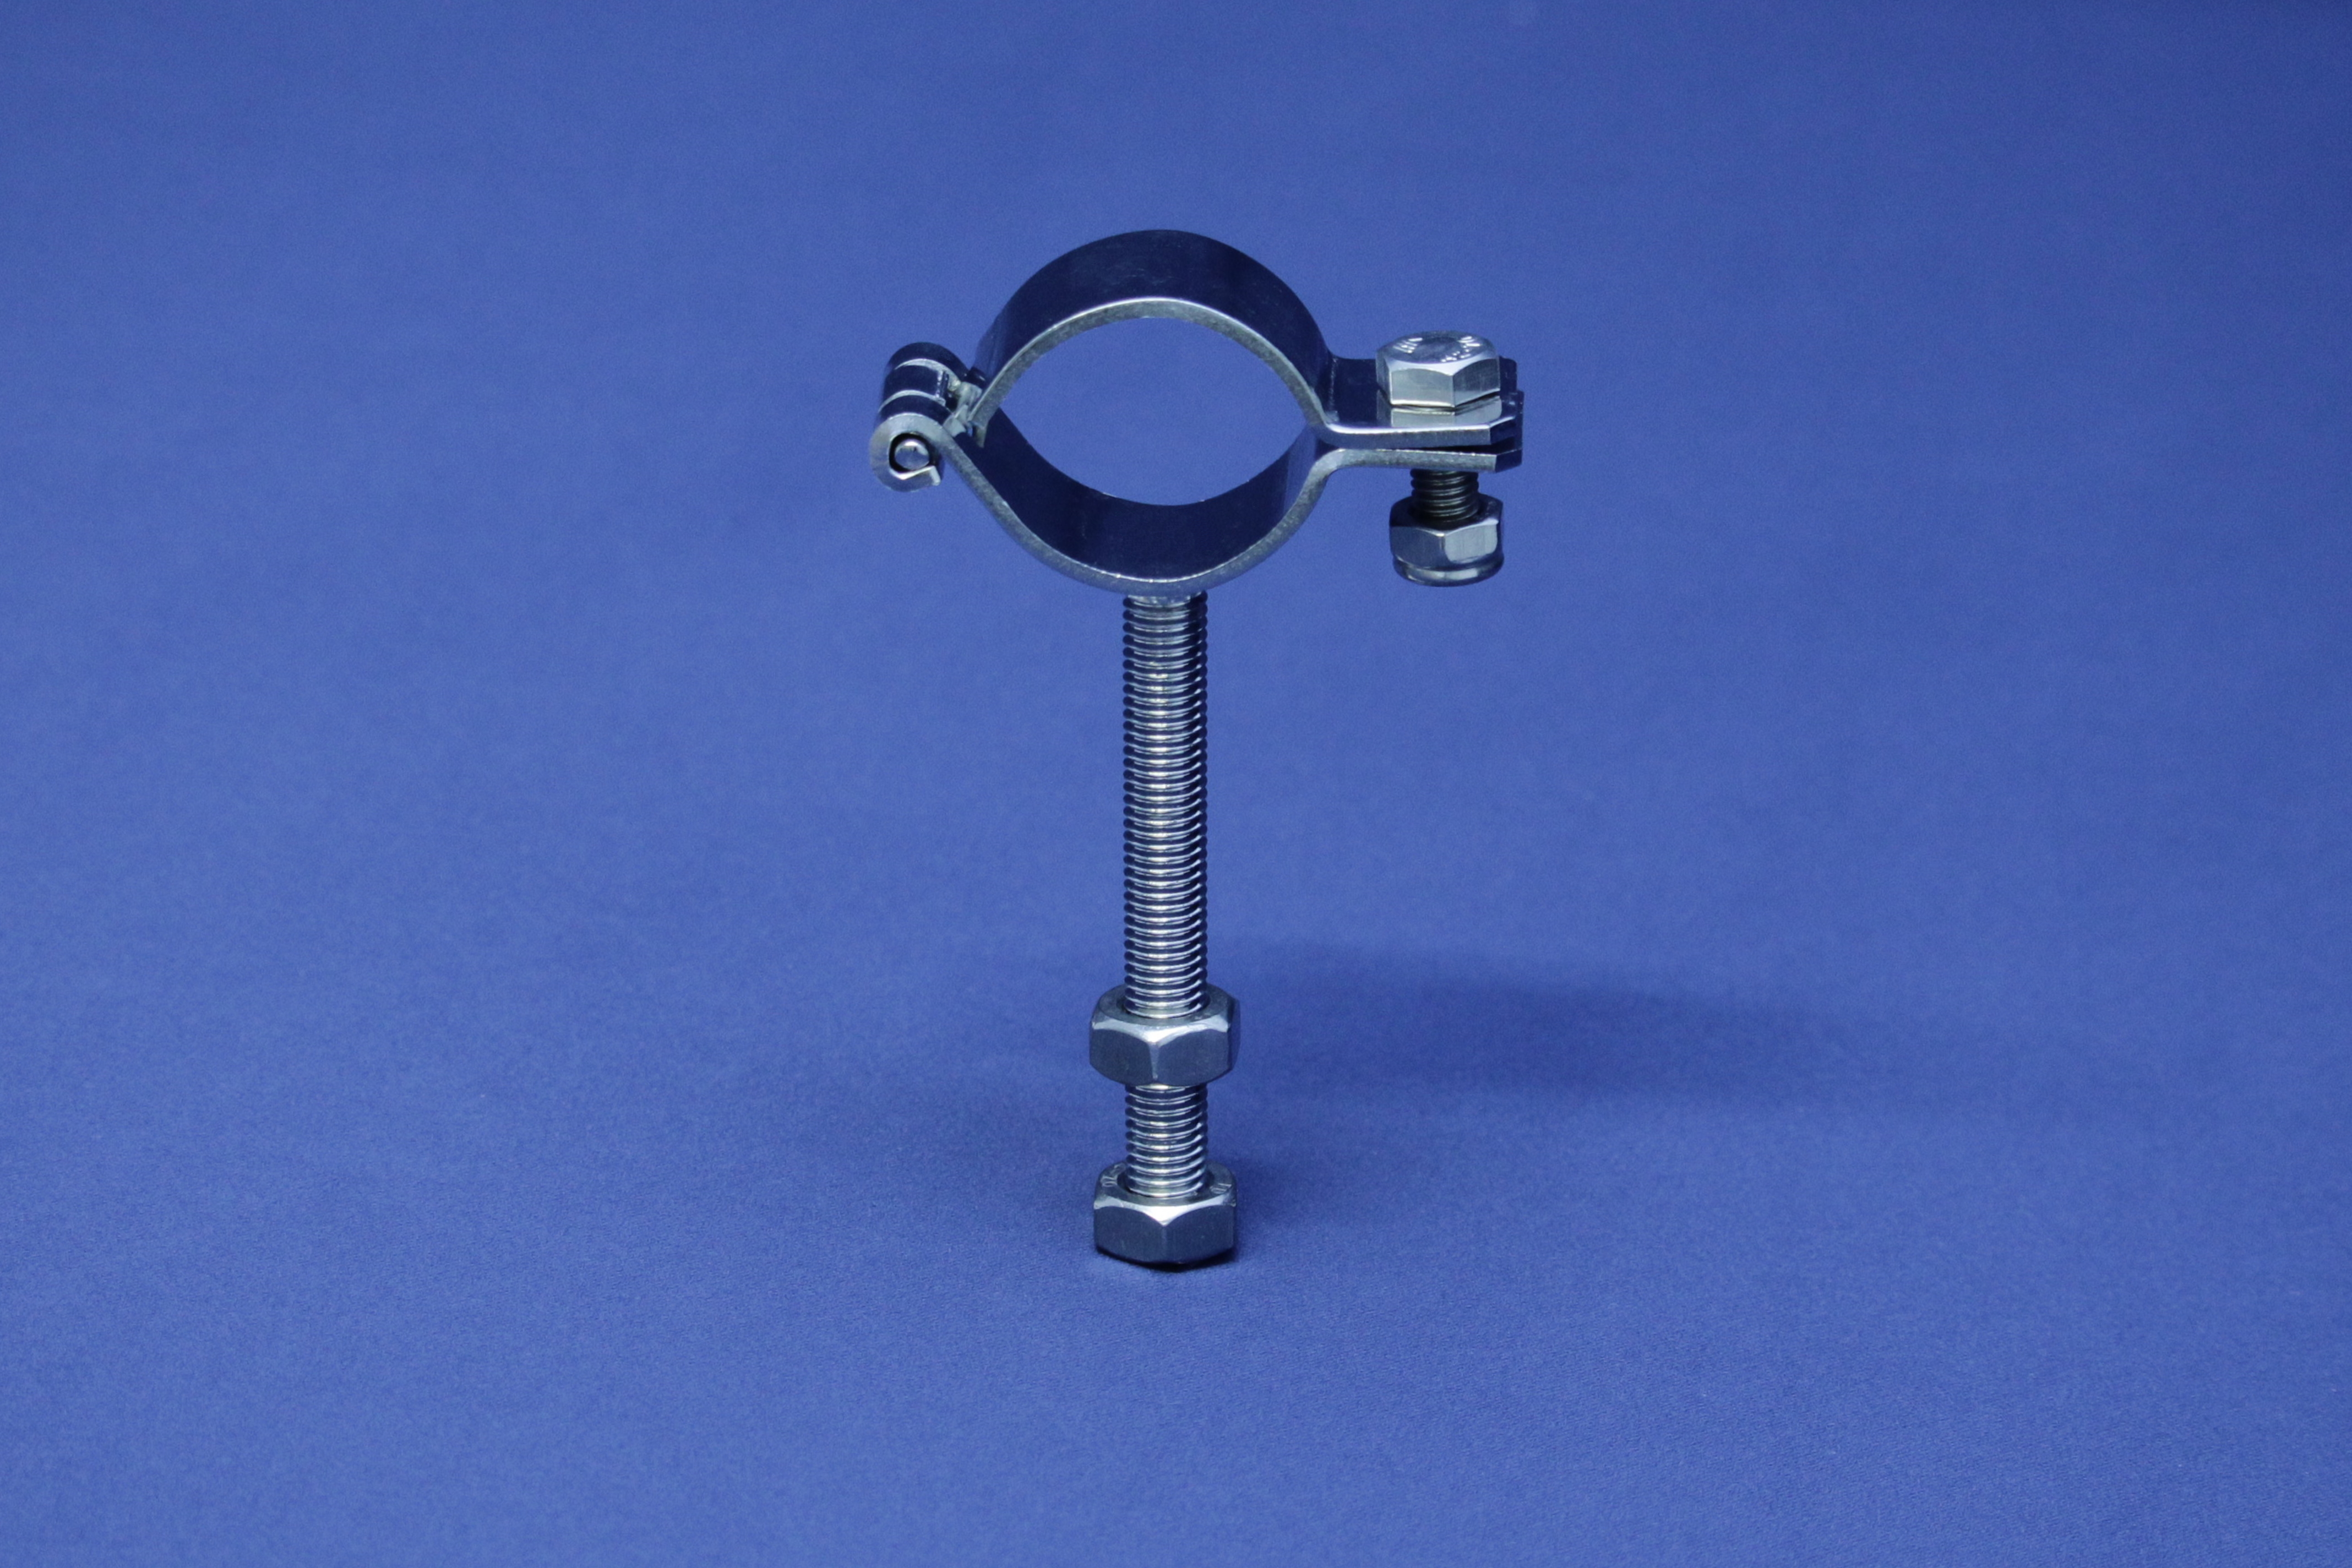 PIPE CLAMP HINGED DN 40 304 POL. WITH THREADED SHANK